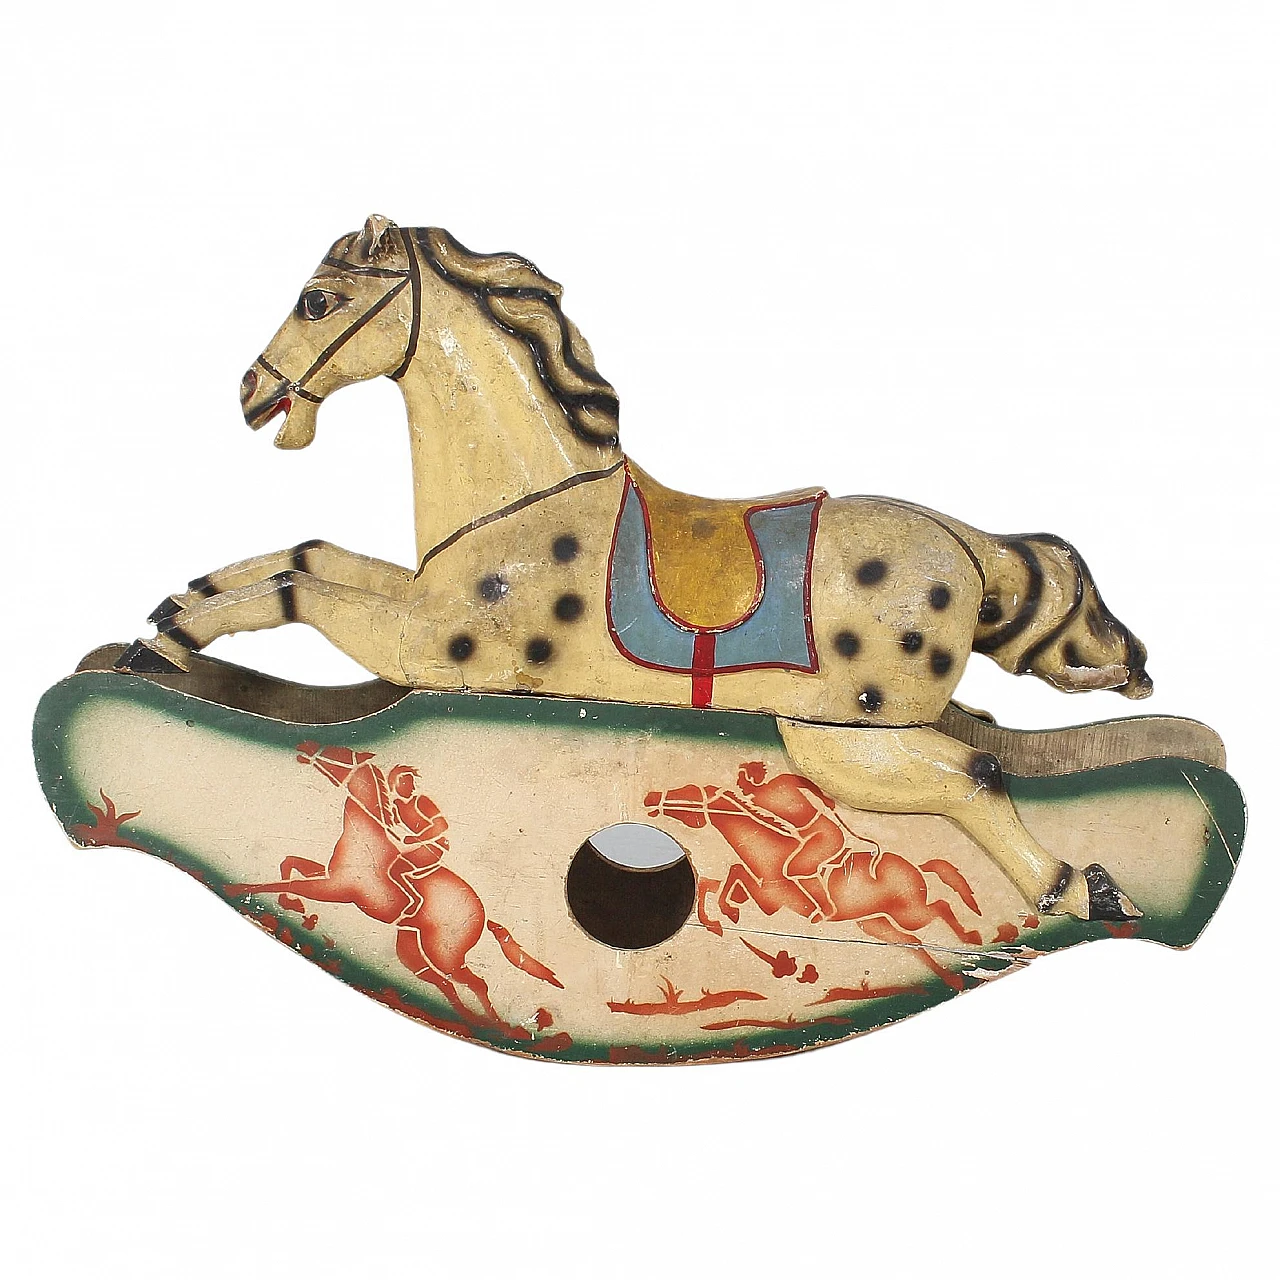 Rocking horse made of papier-mâché, metal and wood, mid-19th century 1